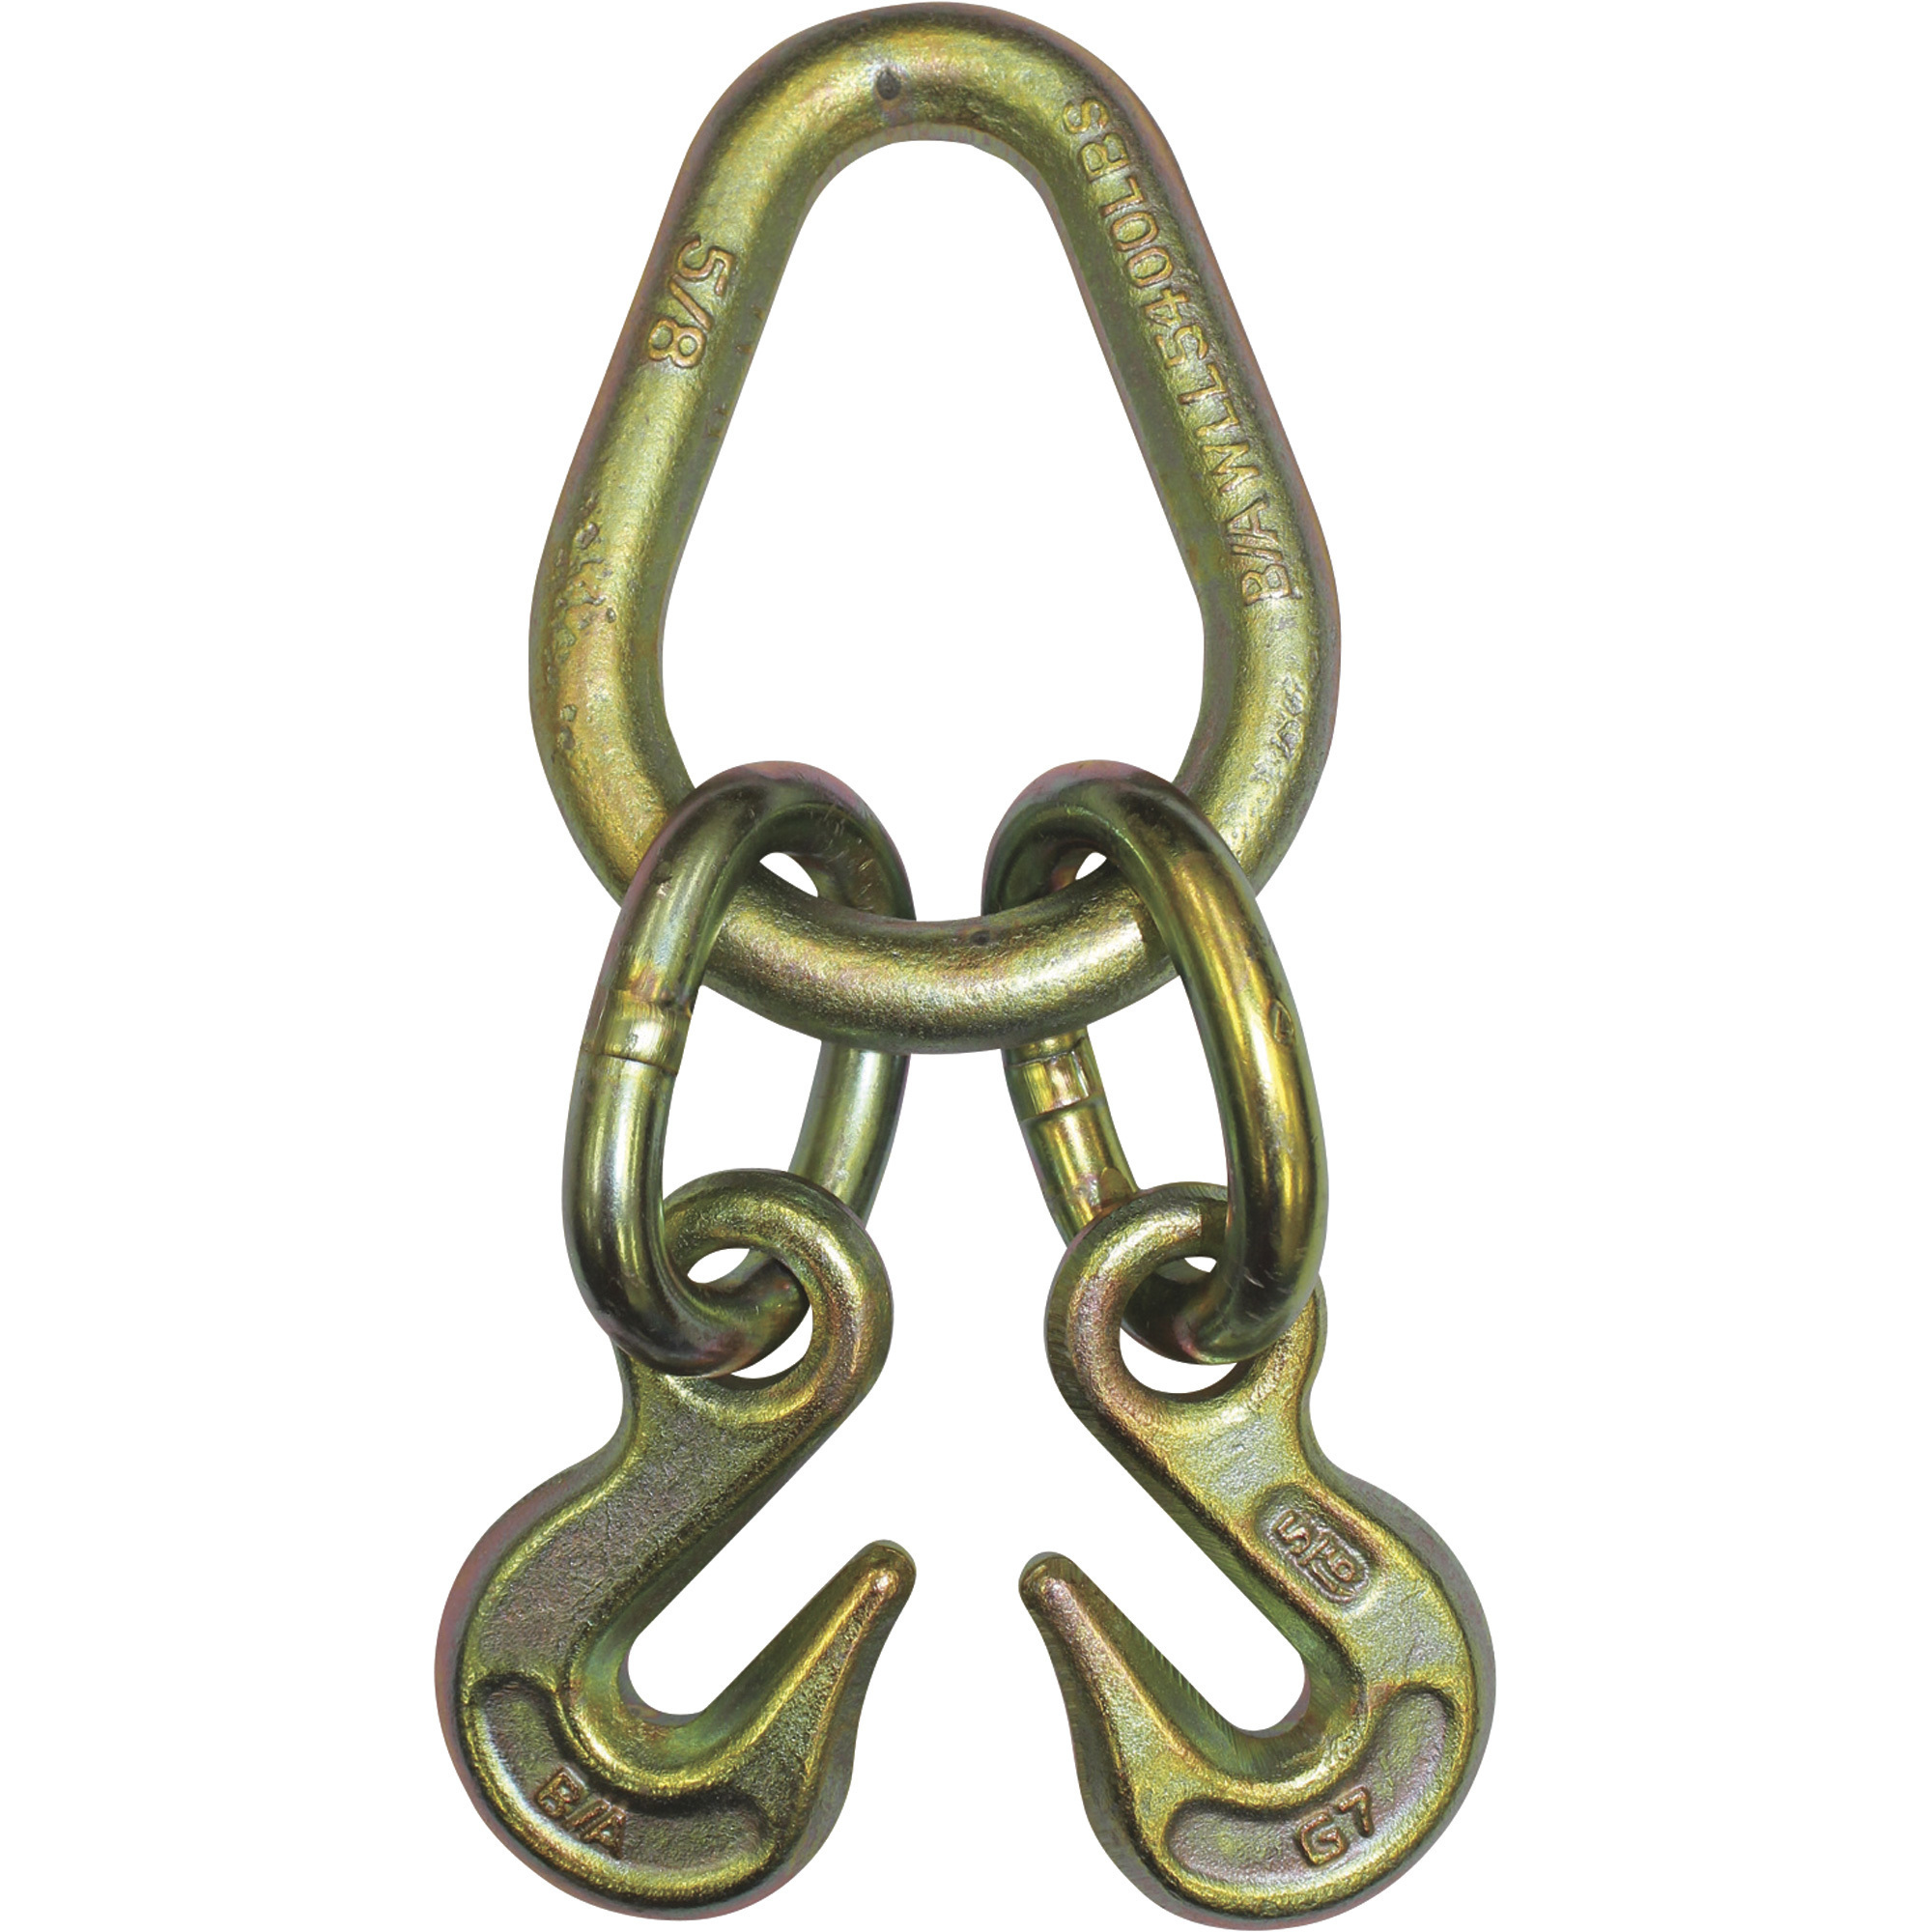 B/A Pear Link with 5/16Inch Grab hooks â 4700-Lb. Safe Working Load, 2ft.L x 8Inch W, Model N711-8E